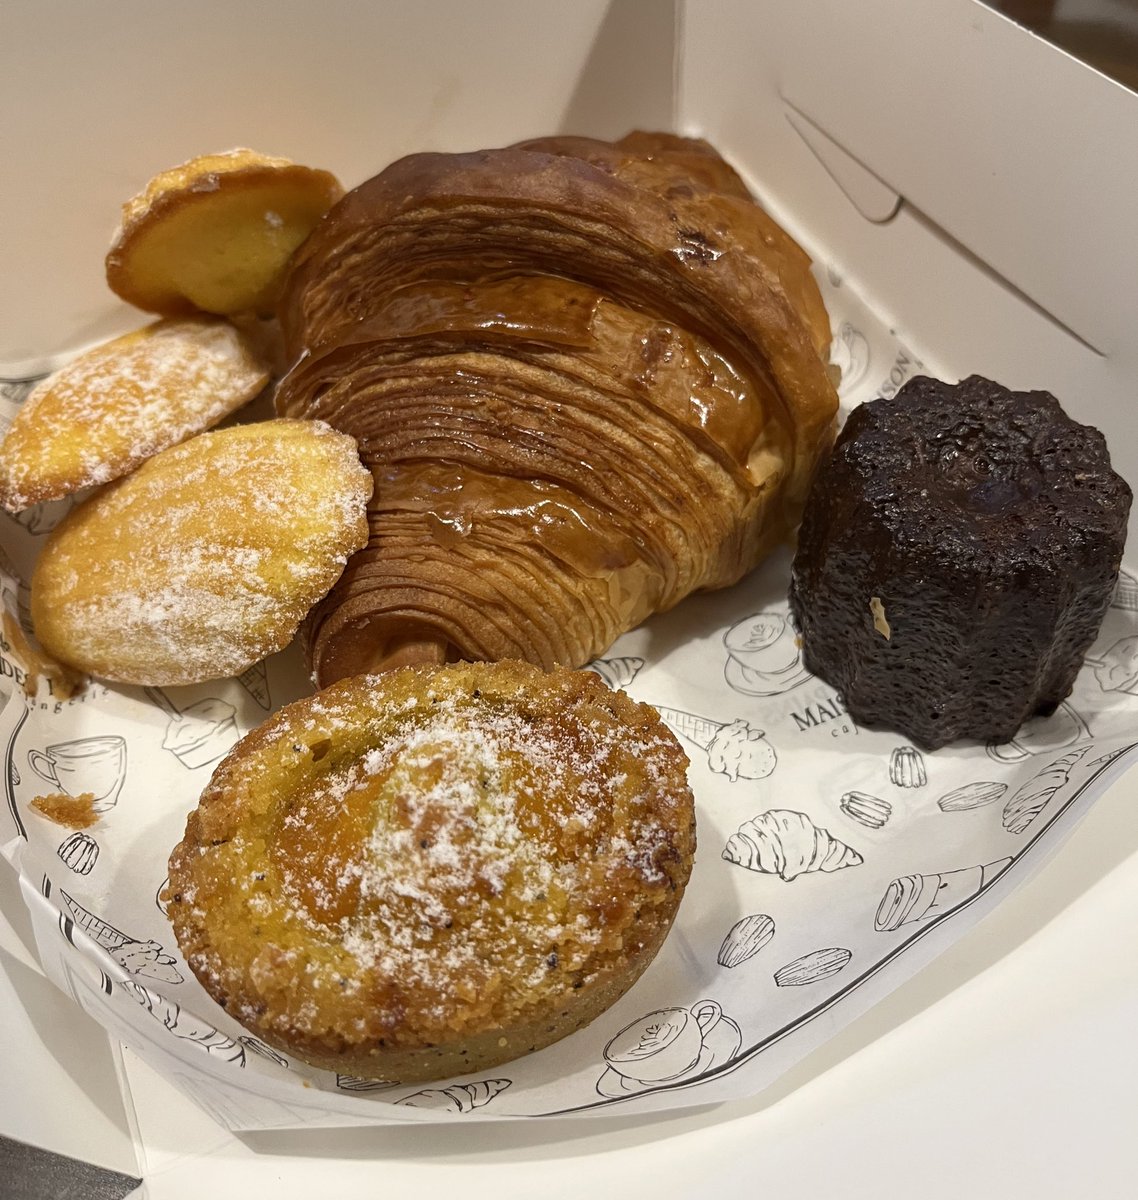 French pastries from maison des pains. Classic butter croissant, madeleines, french lemon poppy seed cake, and non-alcoholic canelé.